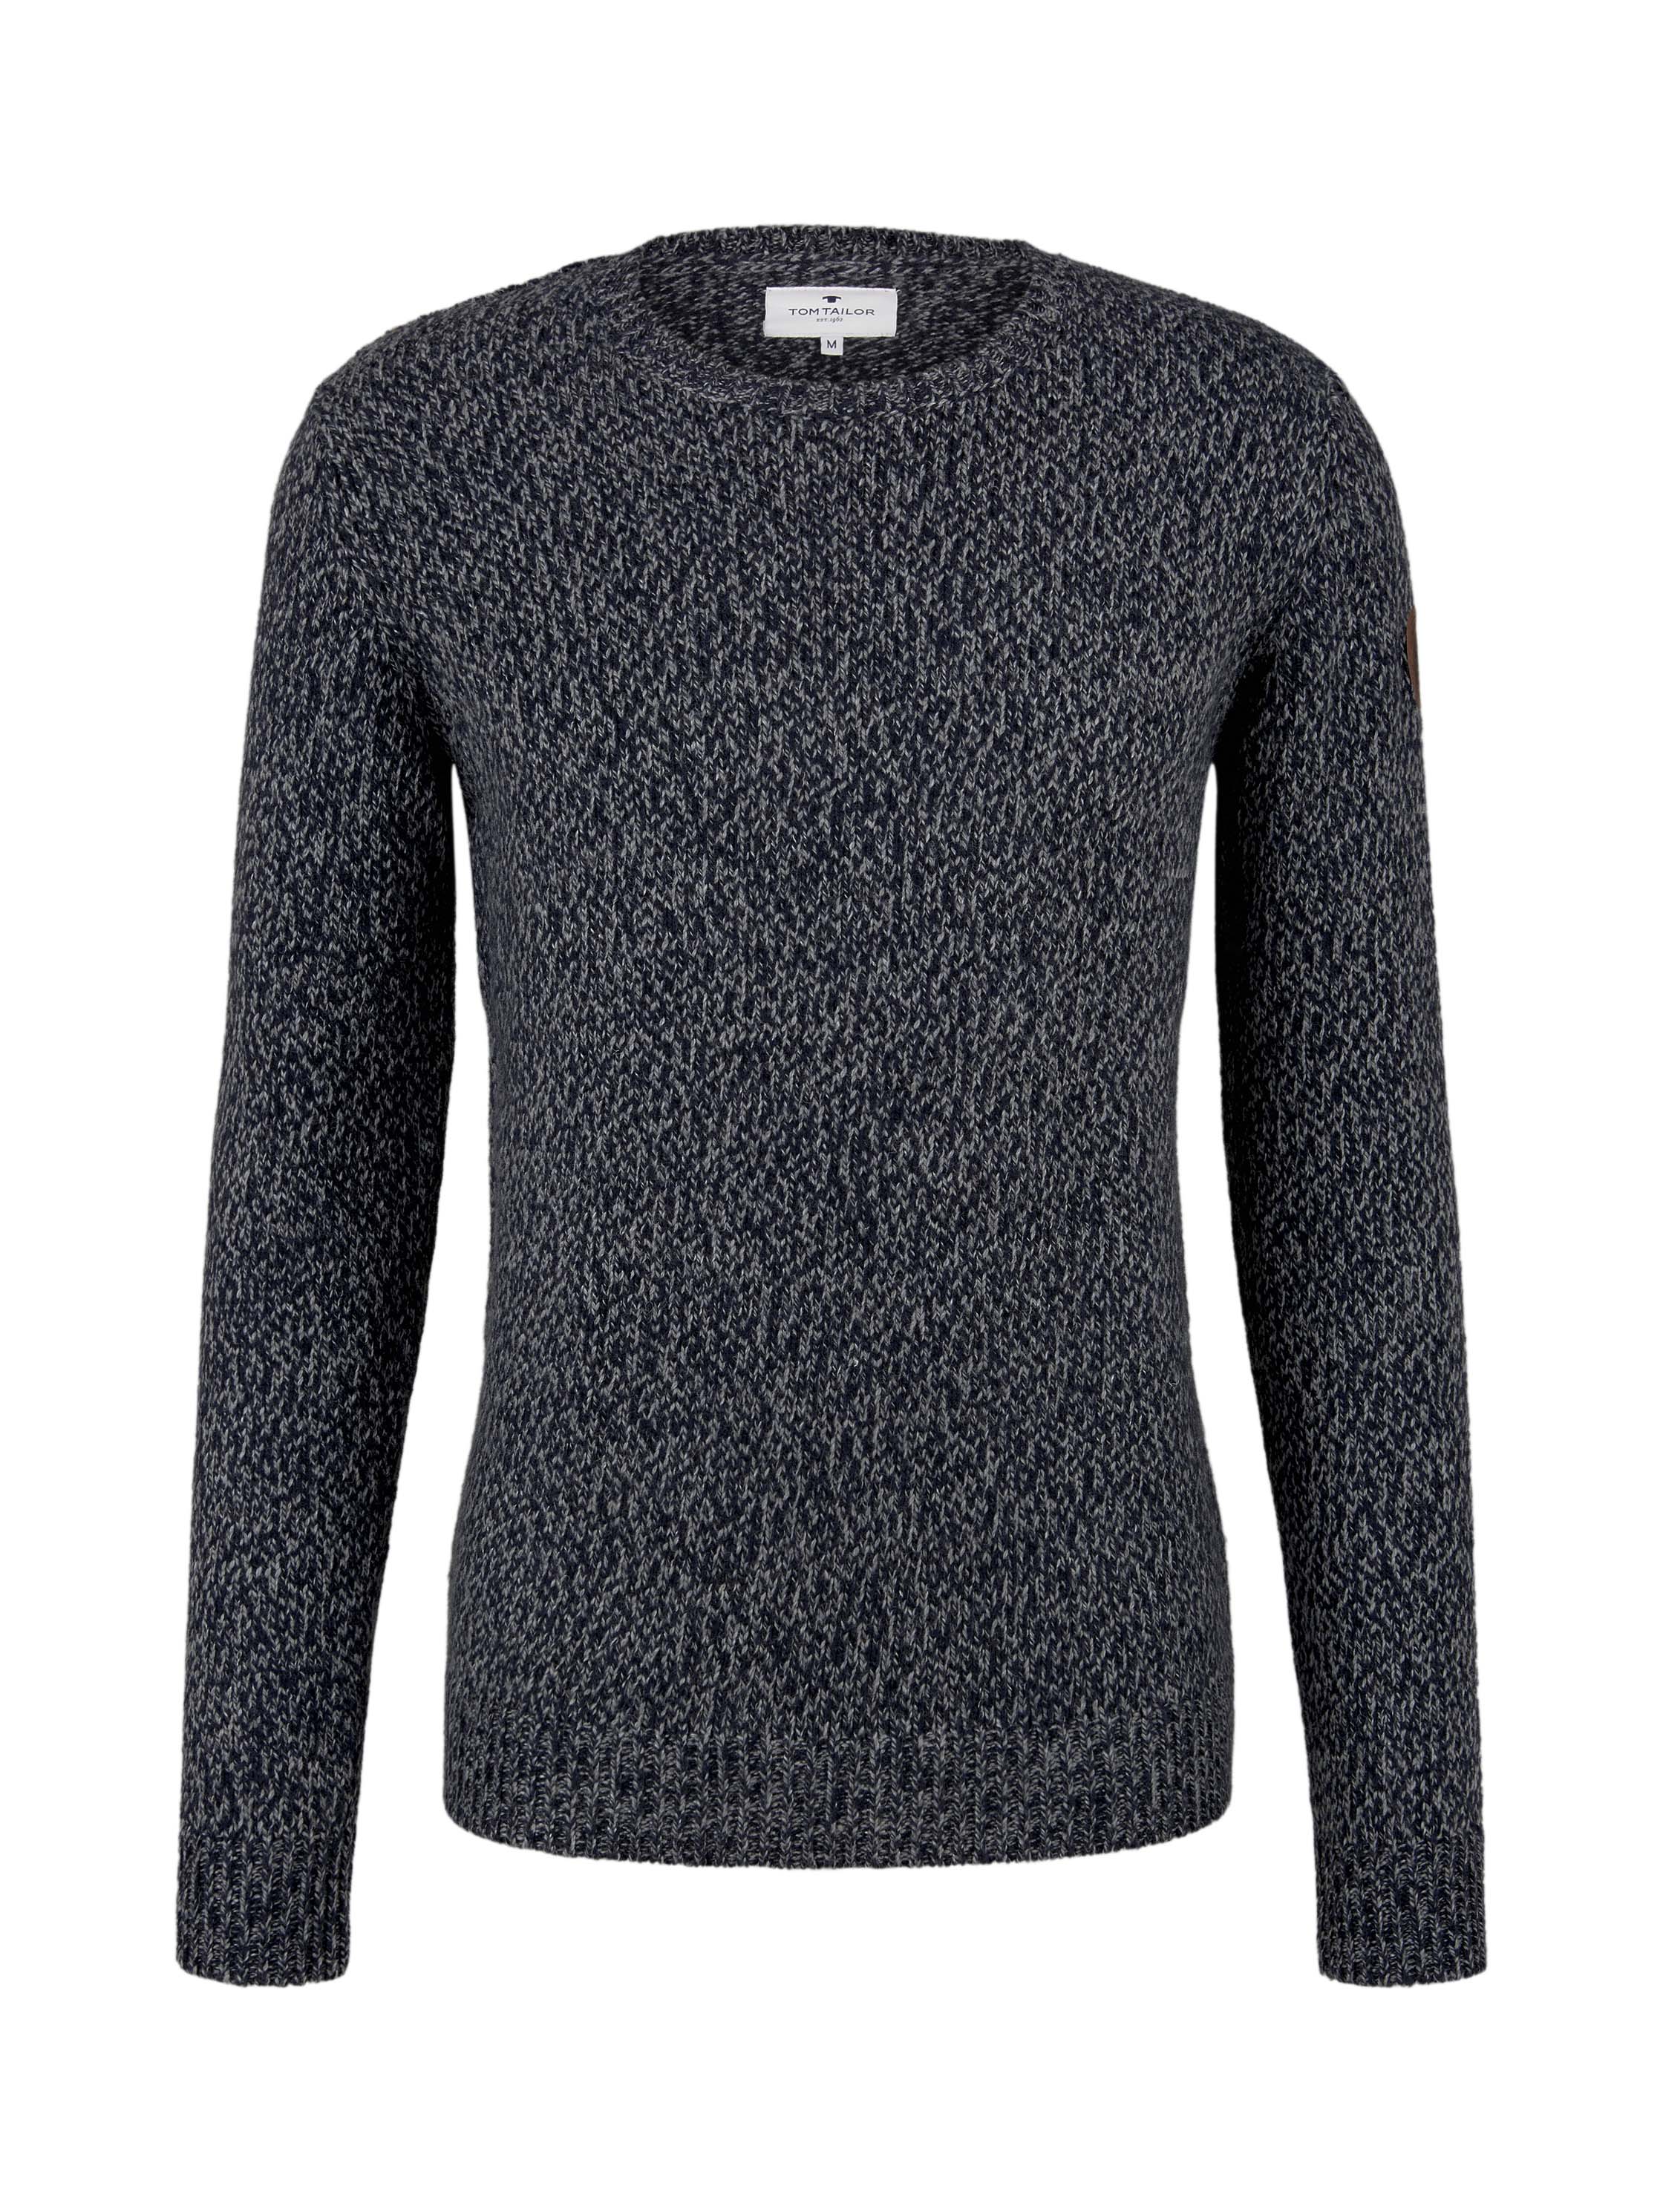 cosy sweater, navy grey mouline